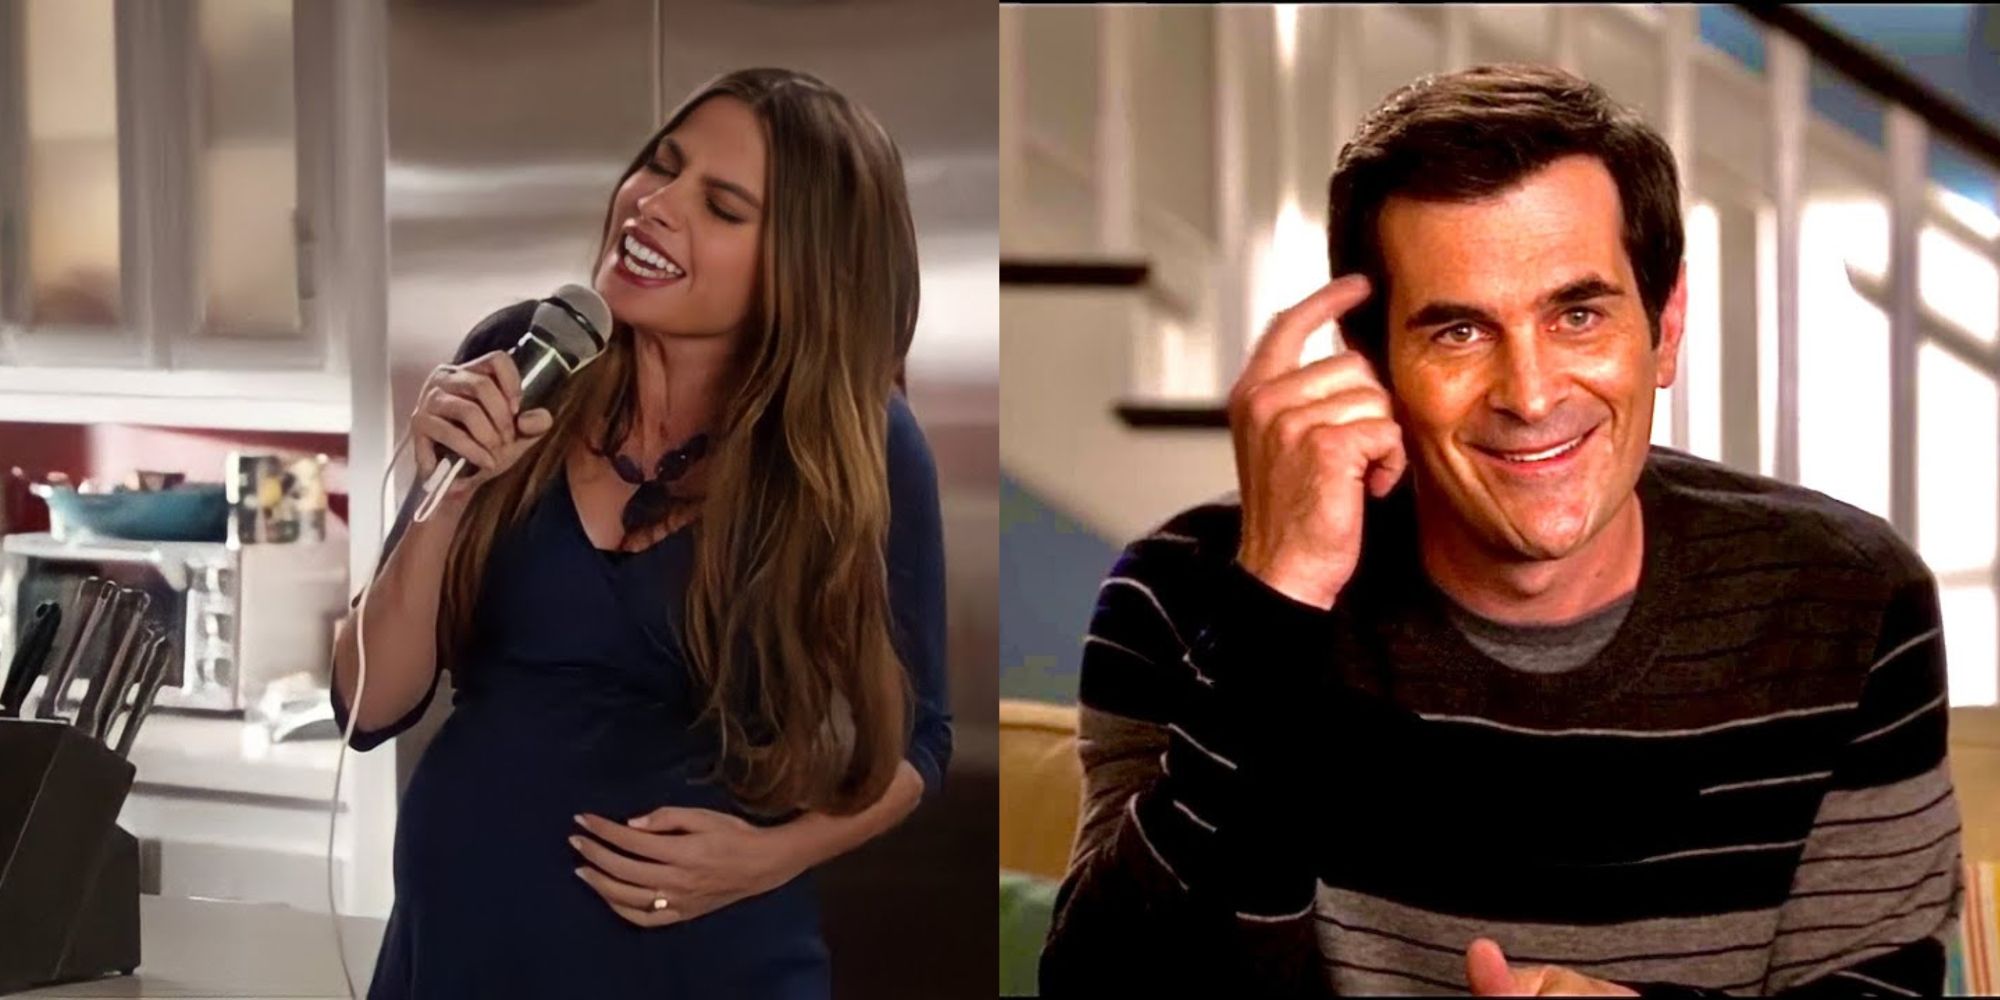 In a split image, Gloria sings and Phil points to his head during an interview on Modern Family.